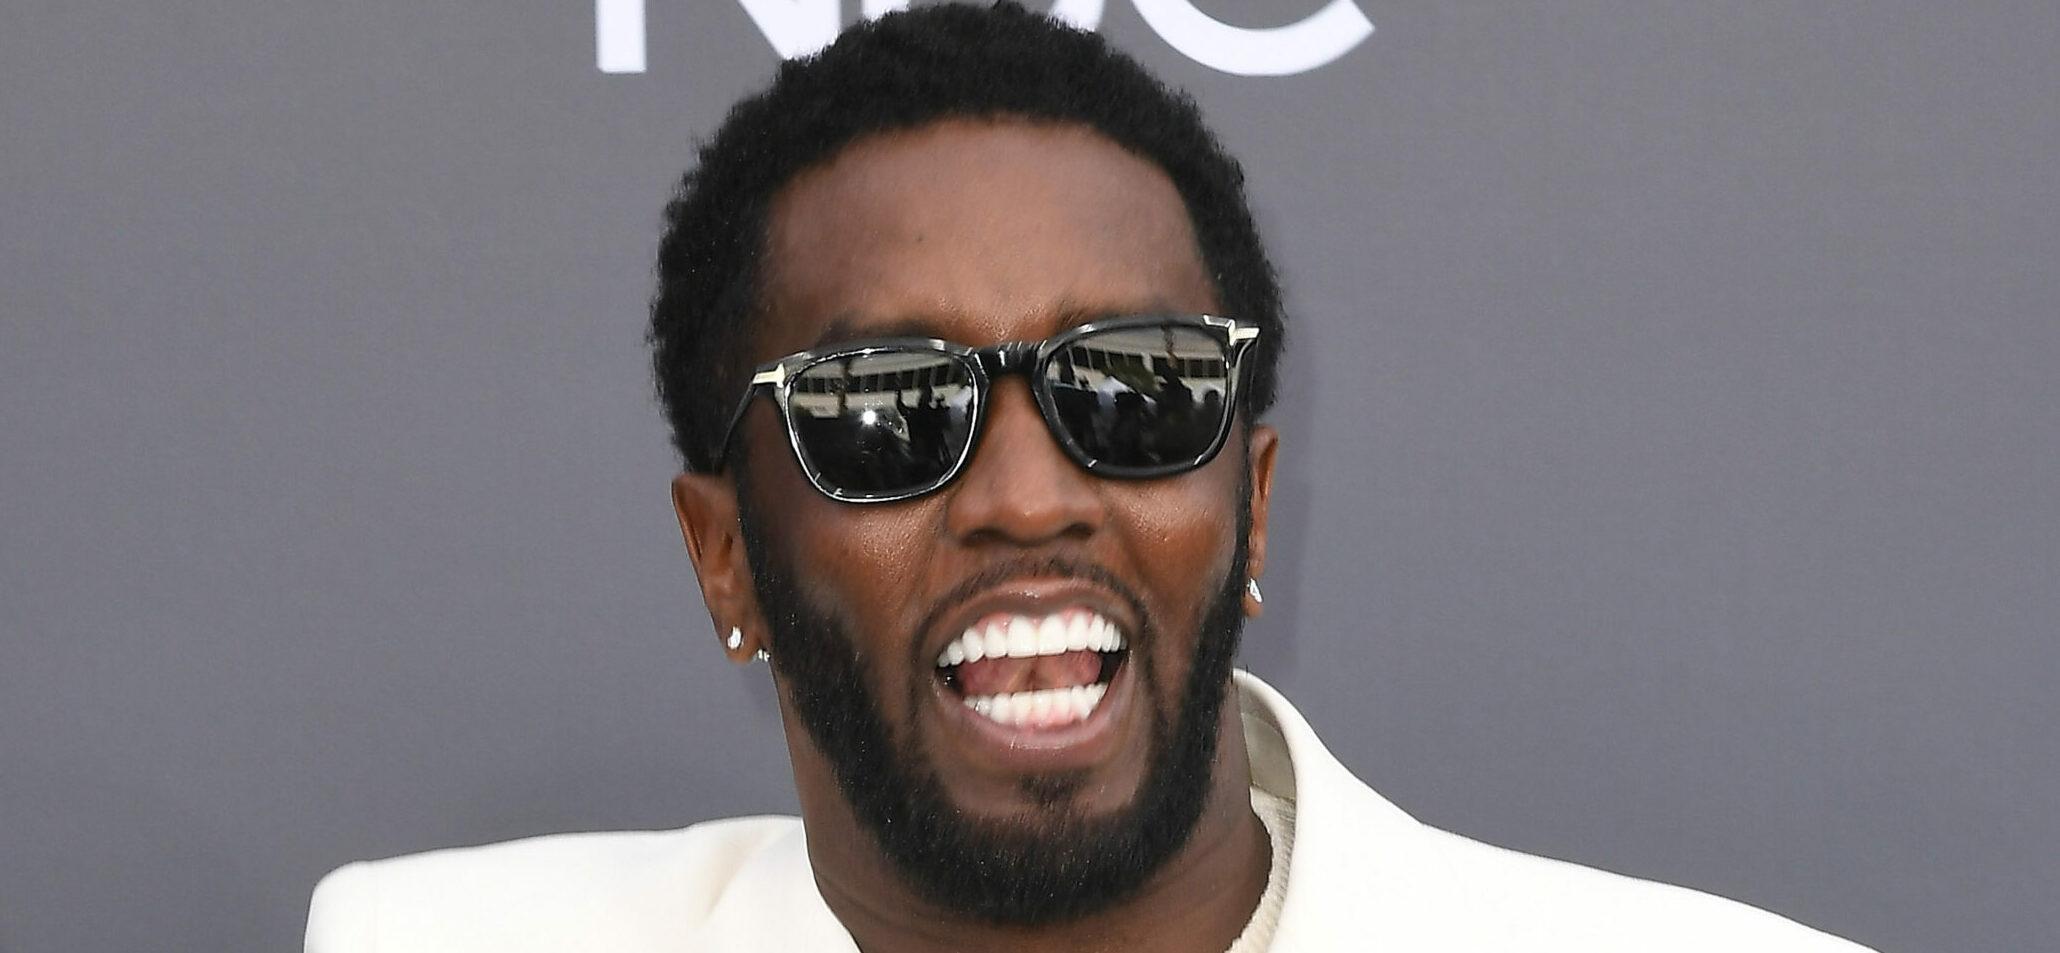 Diddy Announces Arrival Of 6th Child, Fans Have A Field Day